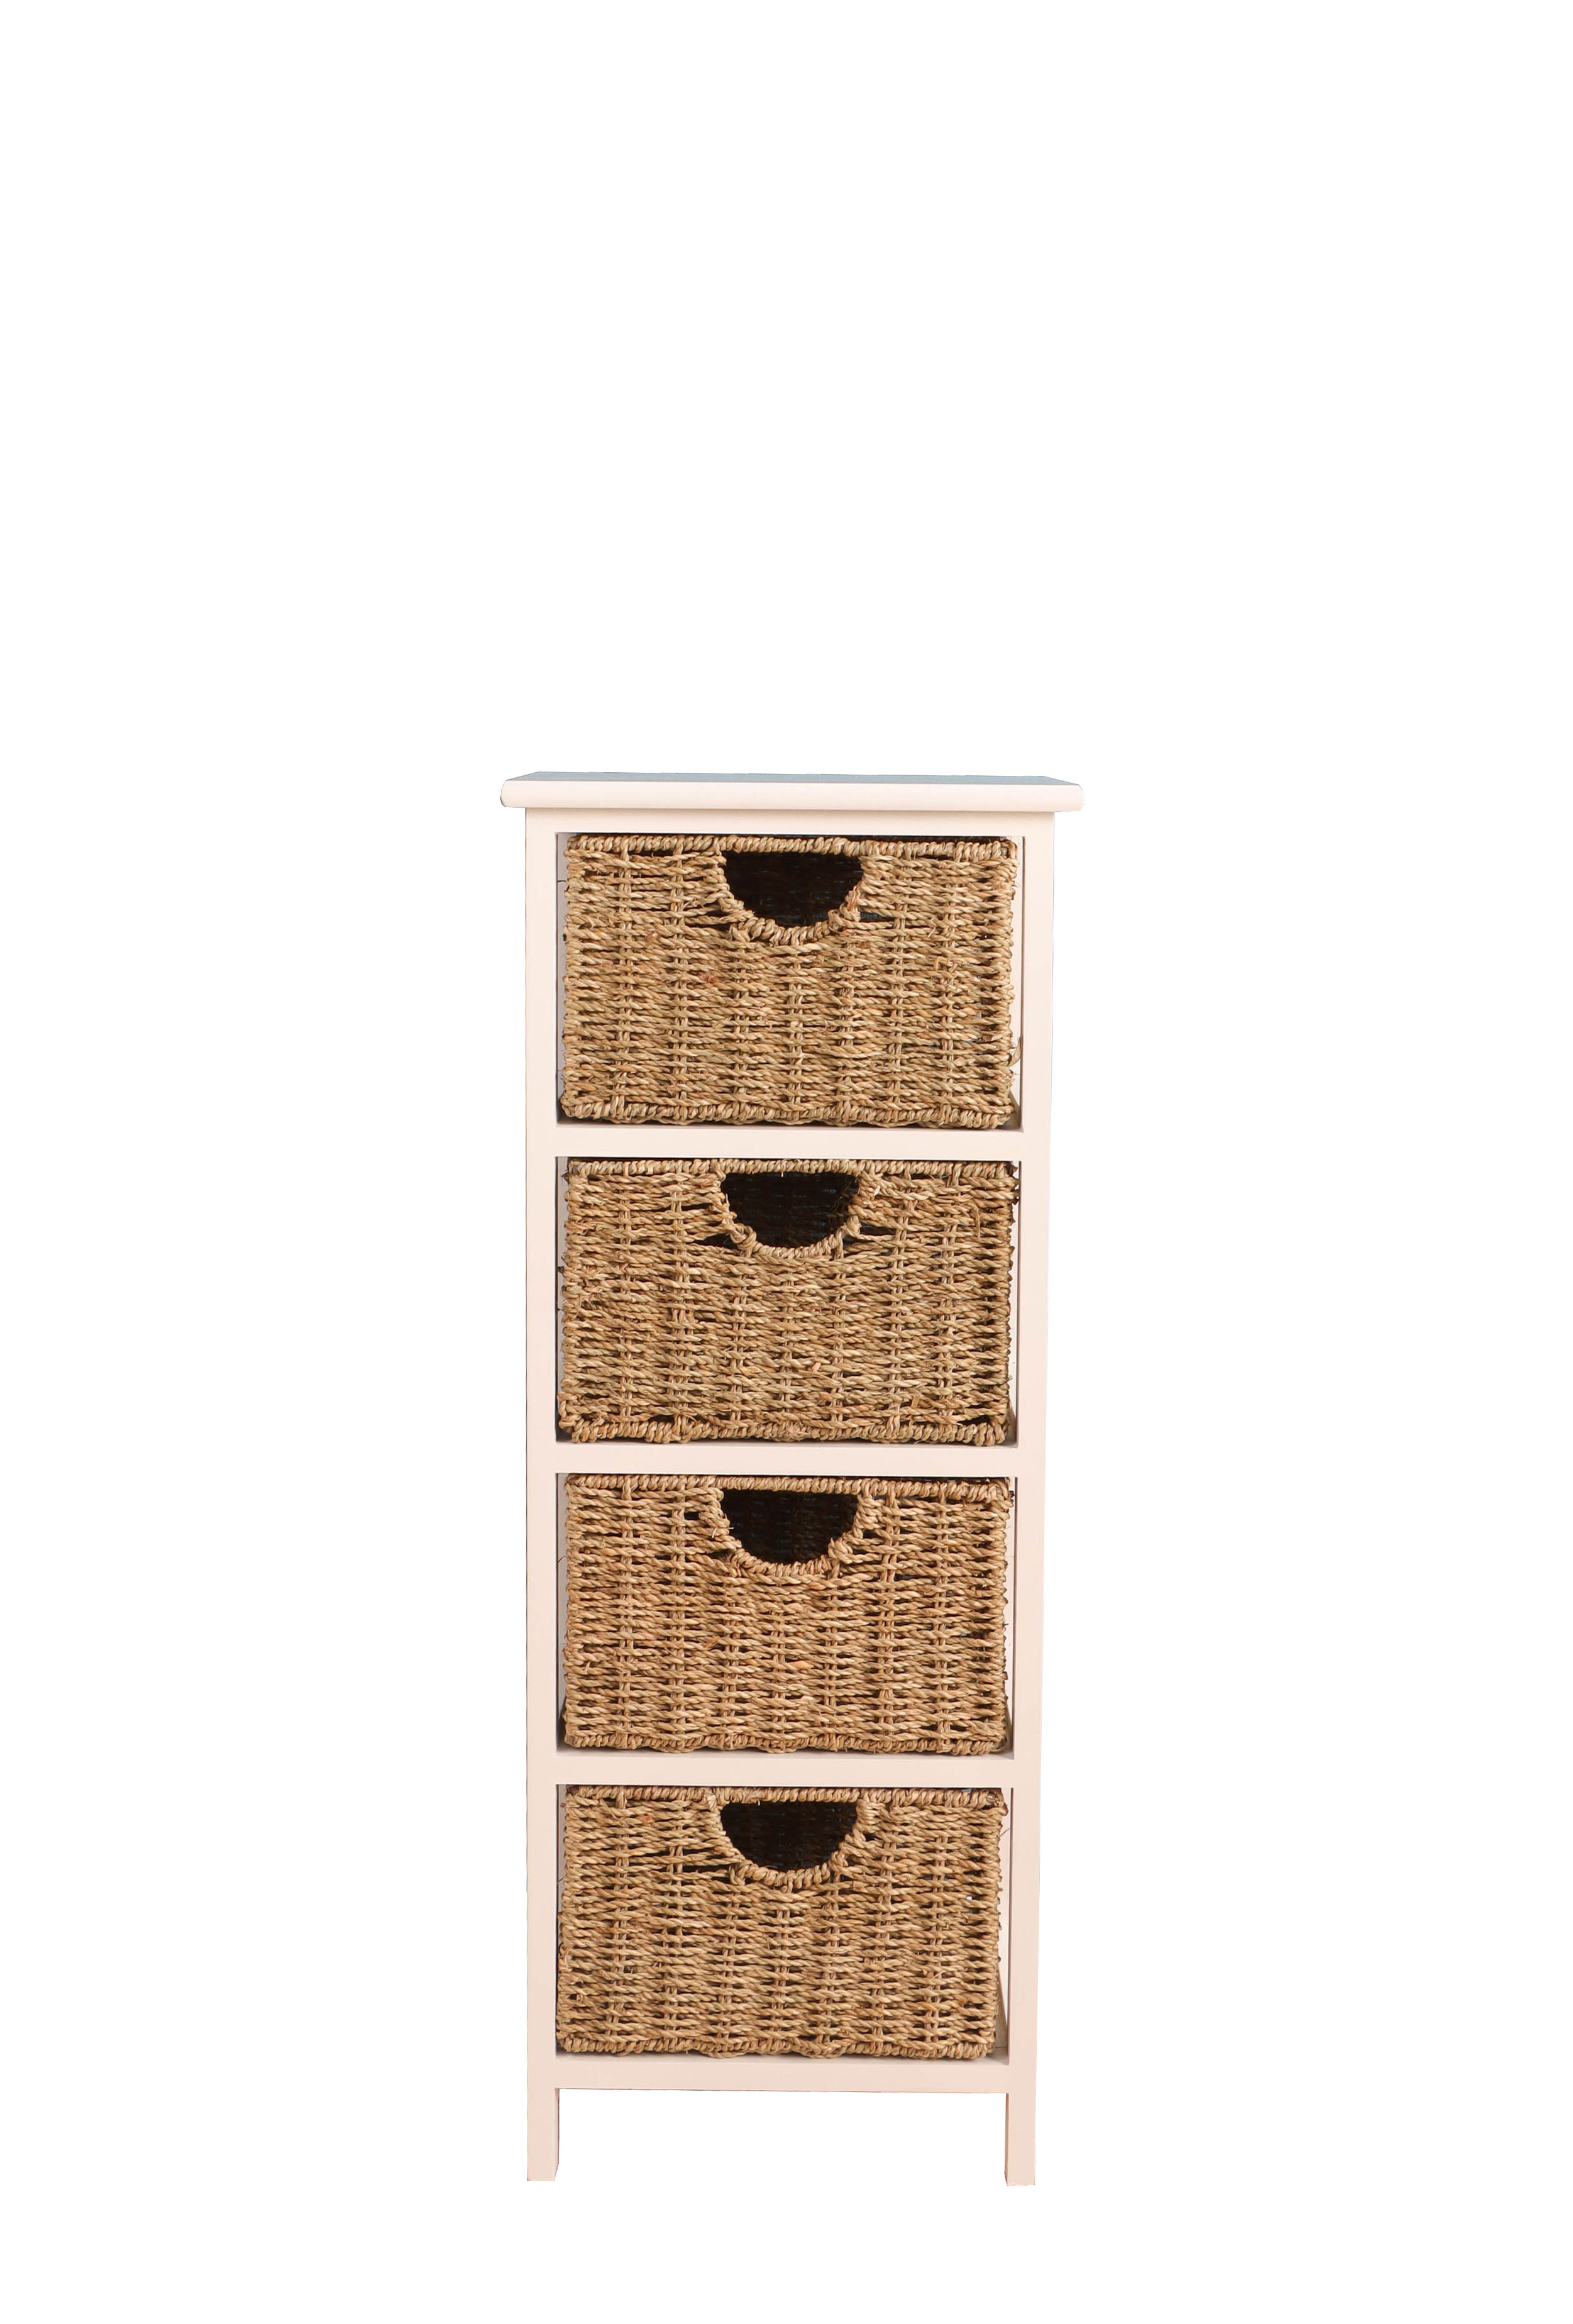 TINA WOODEN CHECT WITH 4 BASKETS